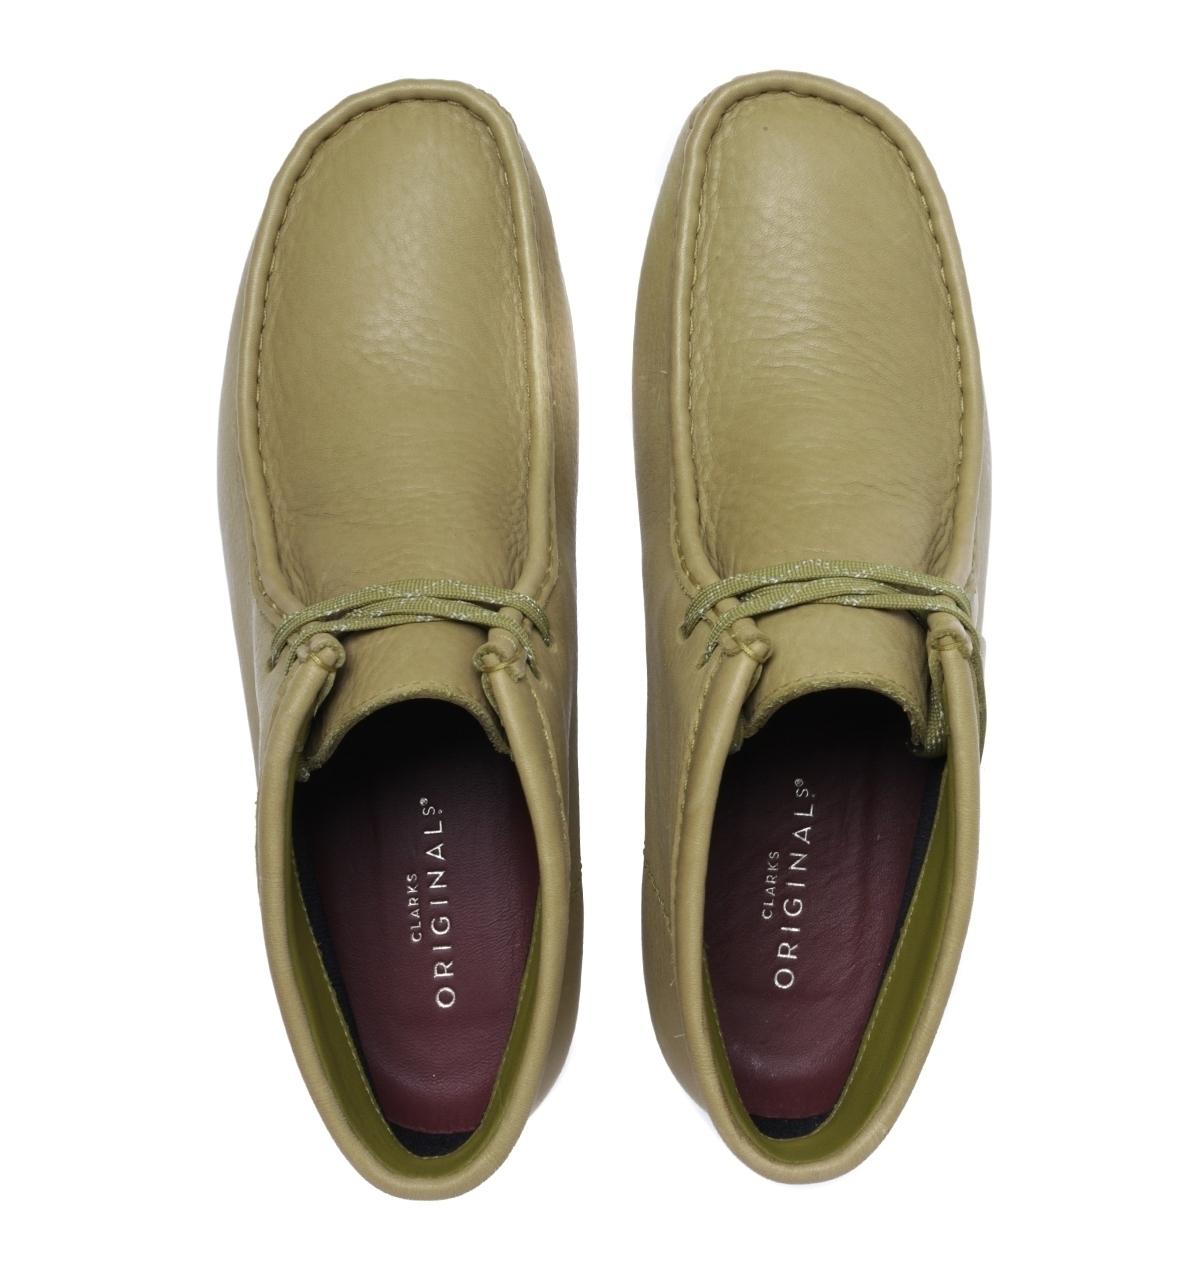 Clarks Gore-tex Wallabee Olive Green 